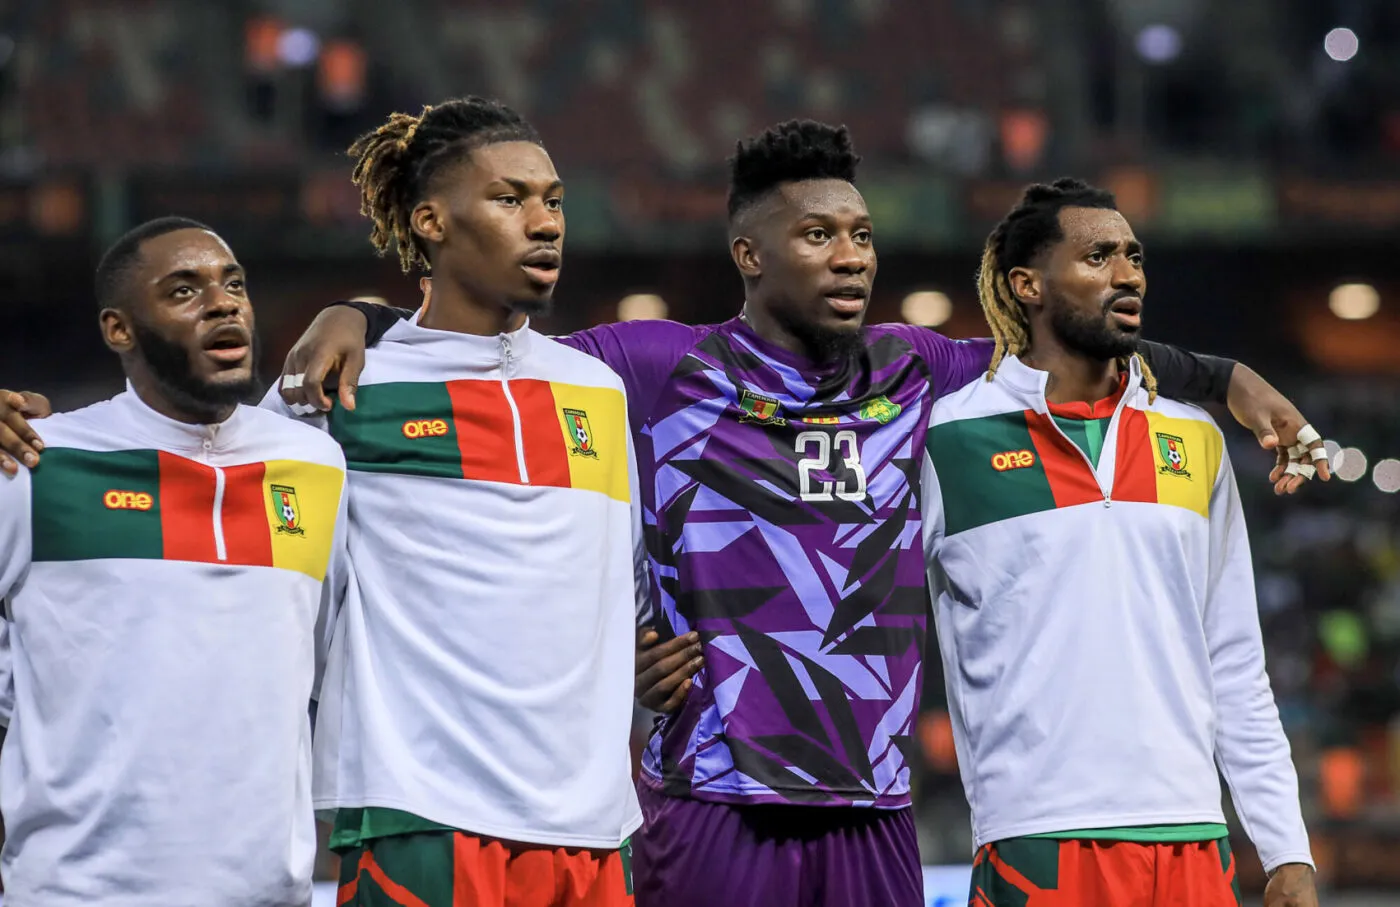 Cameroon team sings national anthem (Andre Onana, goalkeeper of Cameroon second from right and Frank Anguissa, captain of Cameroon on the far right) during the 2026 FIFA World Cup Qualifiers between Cameroon and Mauritius at Japoma Stadium in Douala, Cameroon on 17 November 2023 - Photo by Icon sport